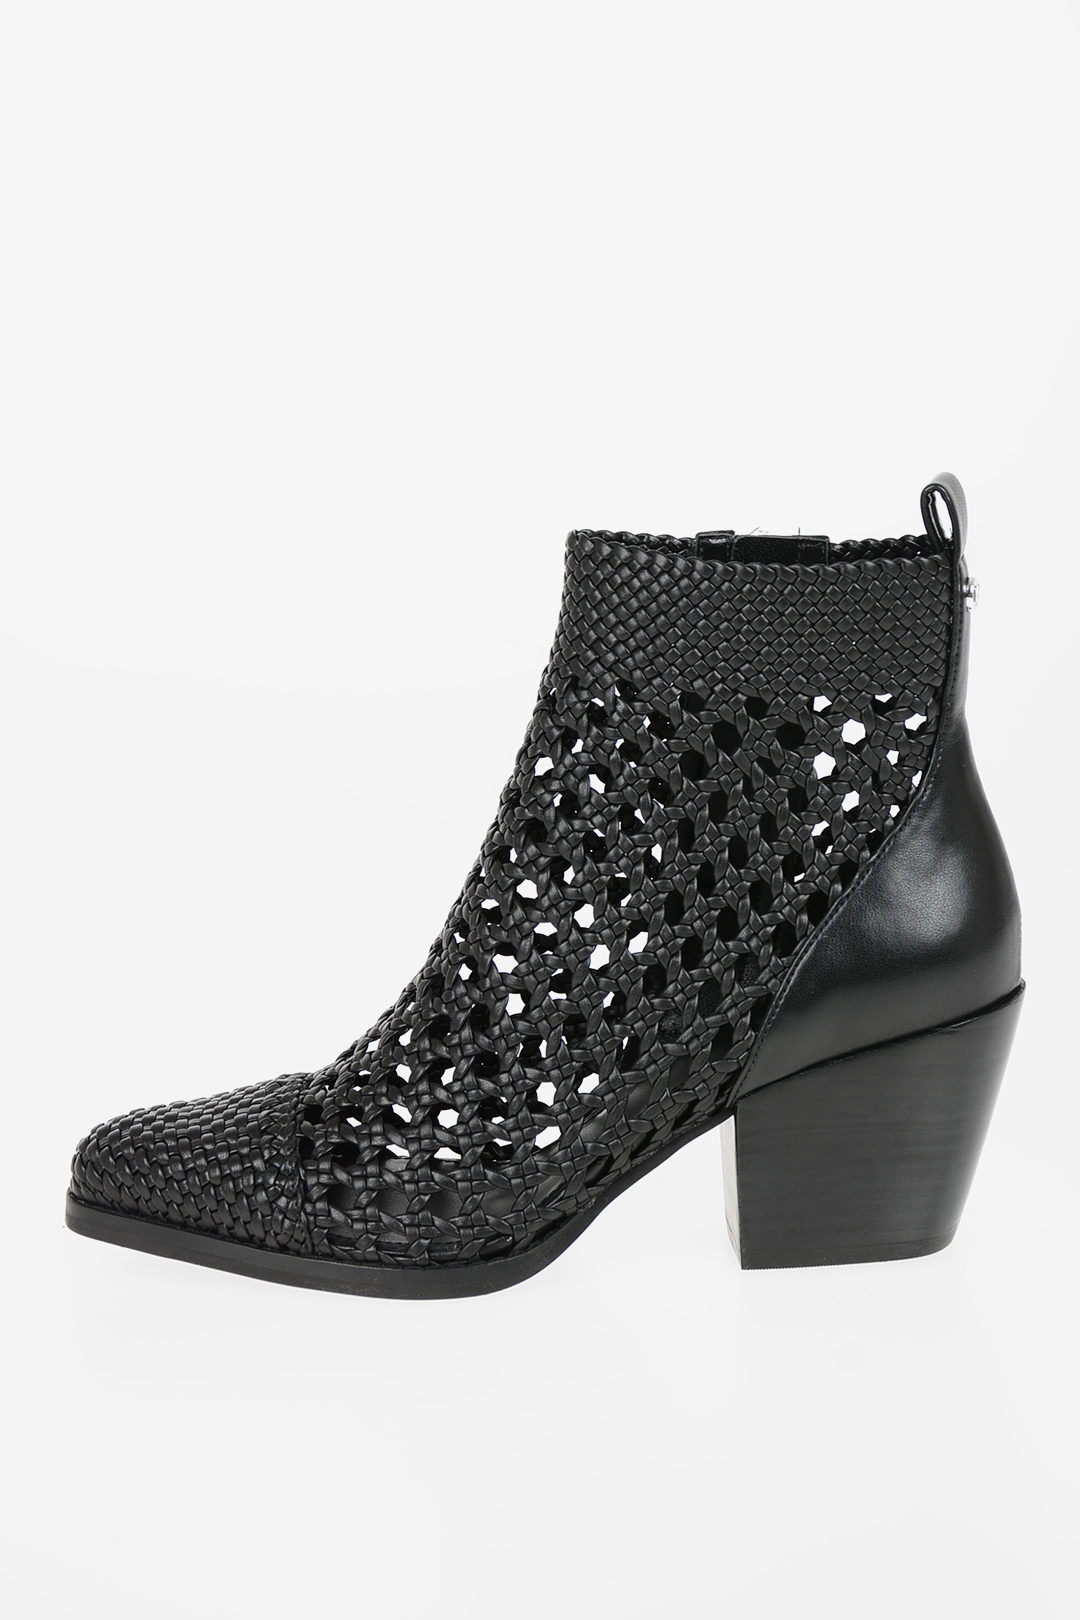 Michael Kors MICHAEL 6cm Openwork AUGUSTINE Ankle Boot women - Glamood  Outlet